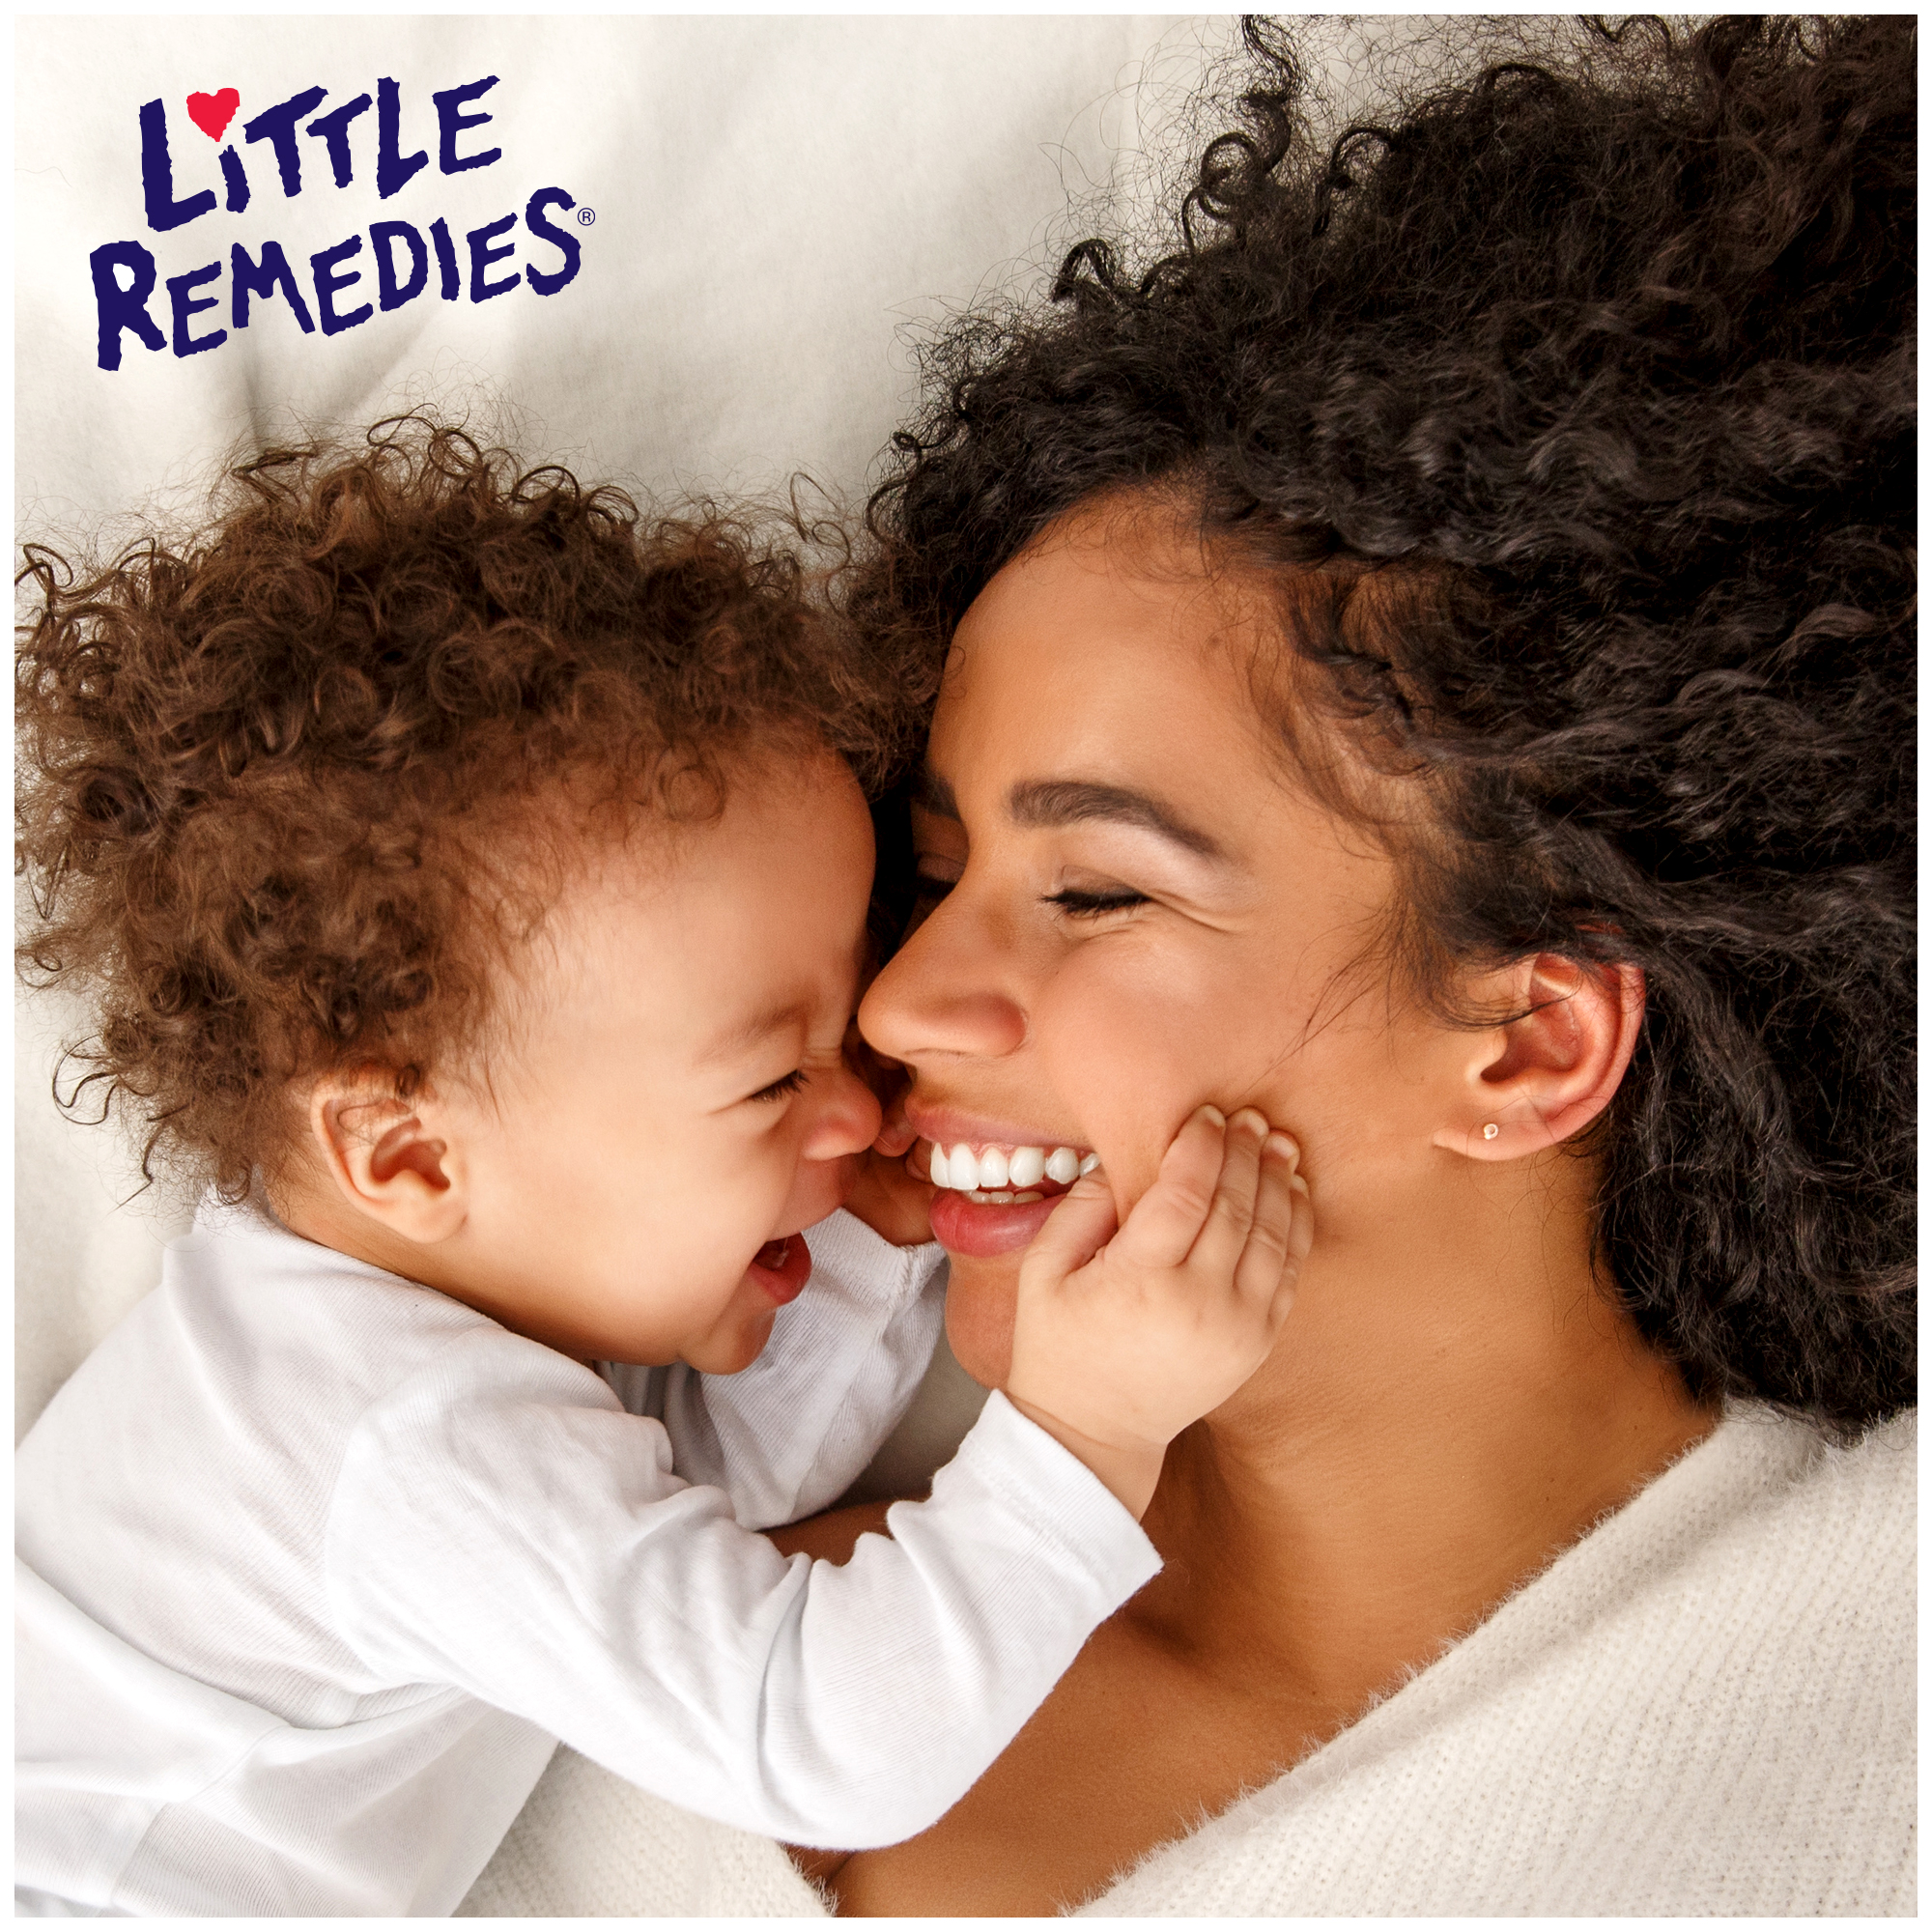 Little Remedies Saline Spray and Drops, Safe for Newborns, Gently Wash Away Mucus, 1 fl oz - image 5 of 9